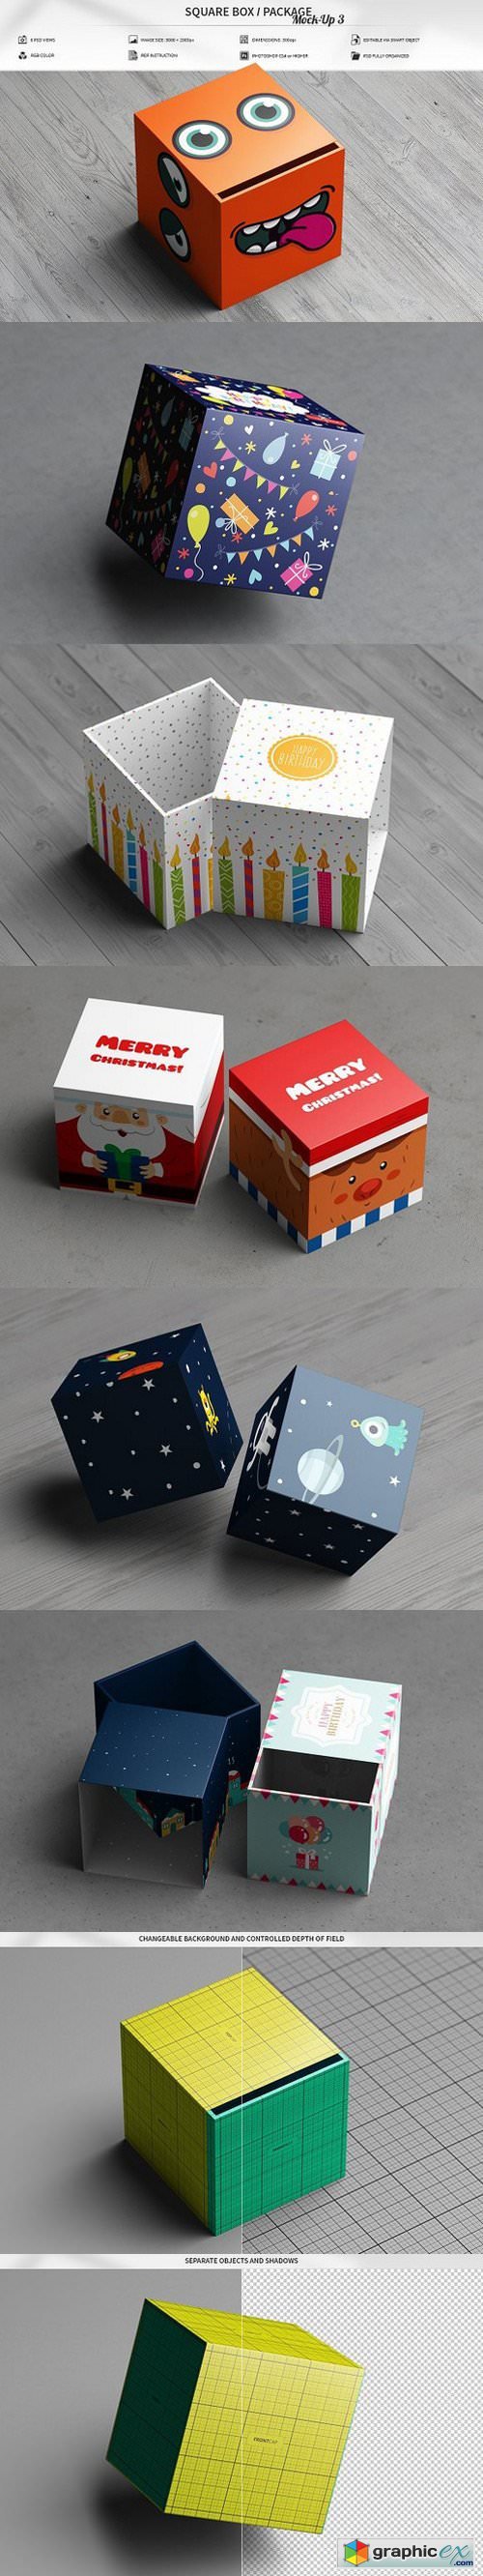 Square Box / Package Mock-Up 3